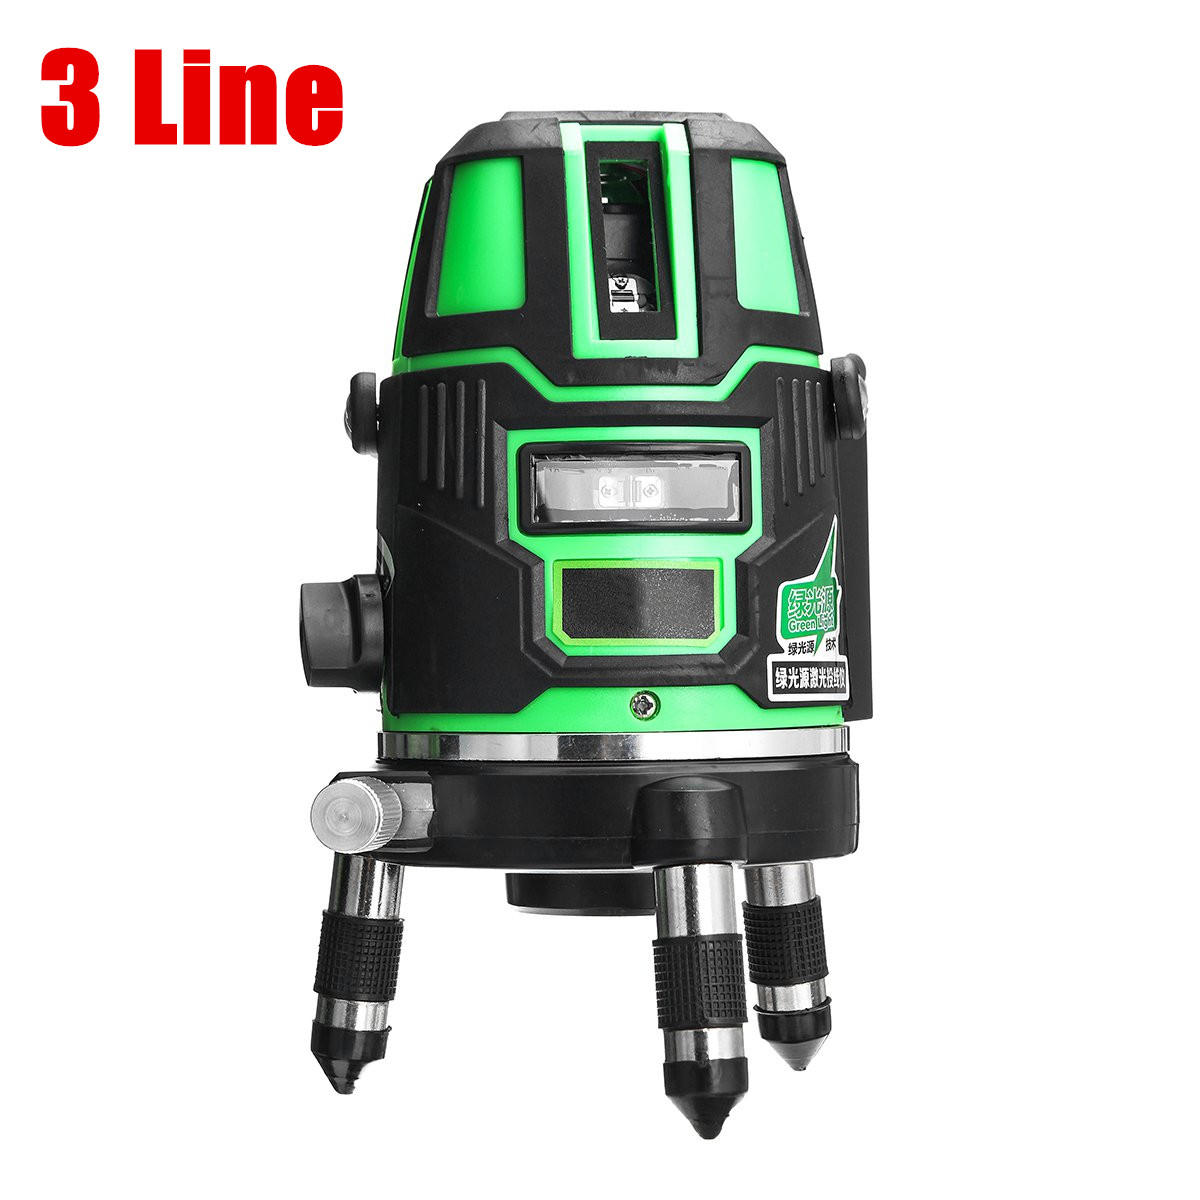 235-Green-Line-Laser-Level-Vertical-Horizontal-Leveling-Rotary-Outdoor-Cross-Measure-1324290